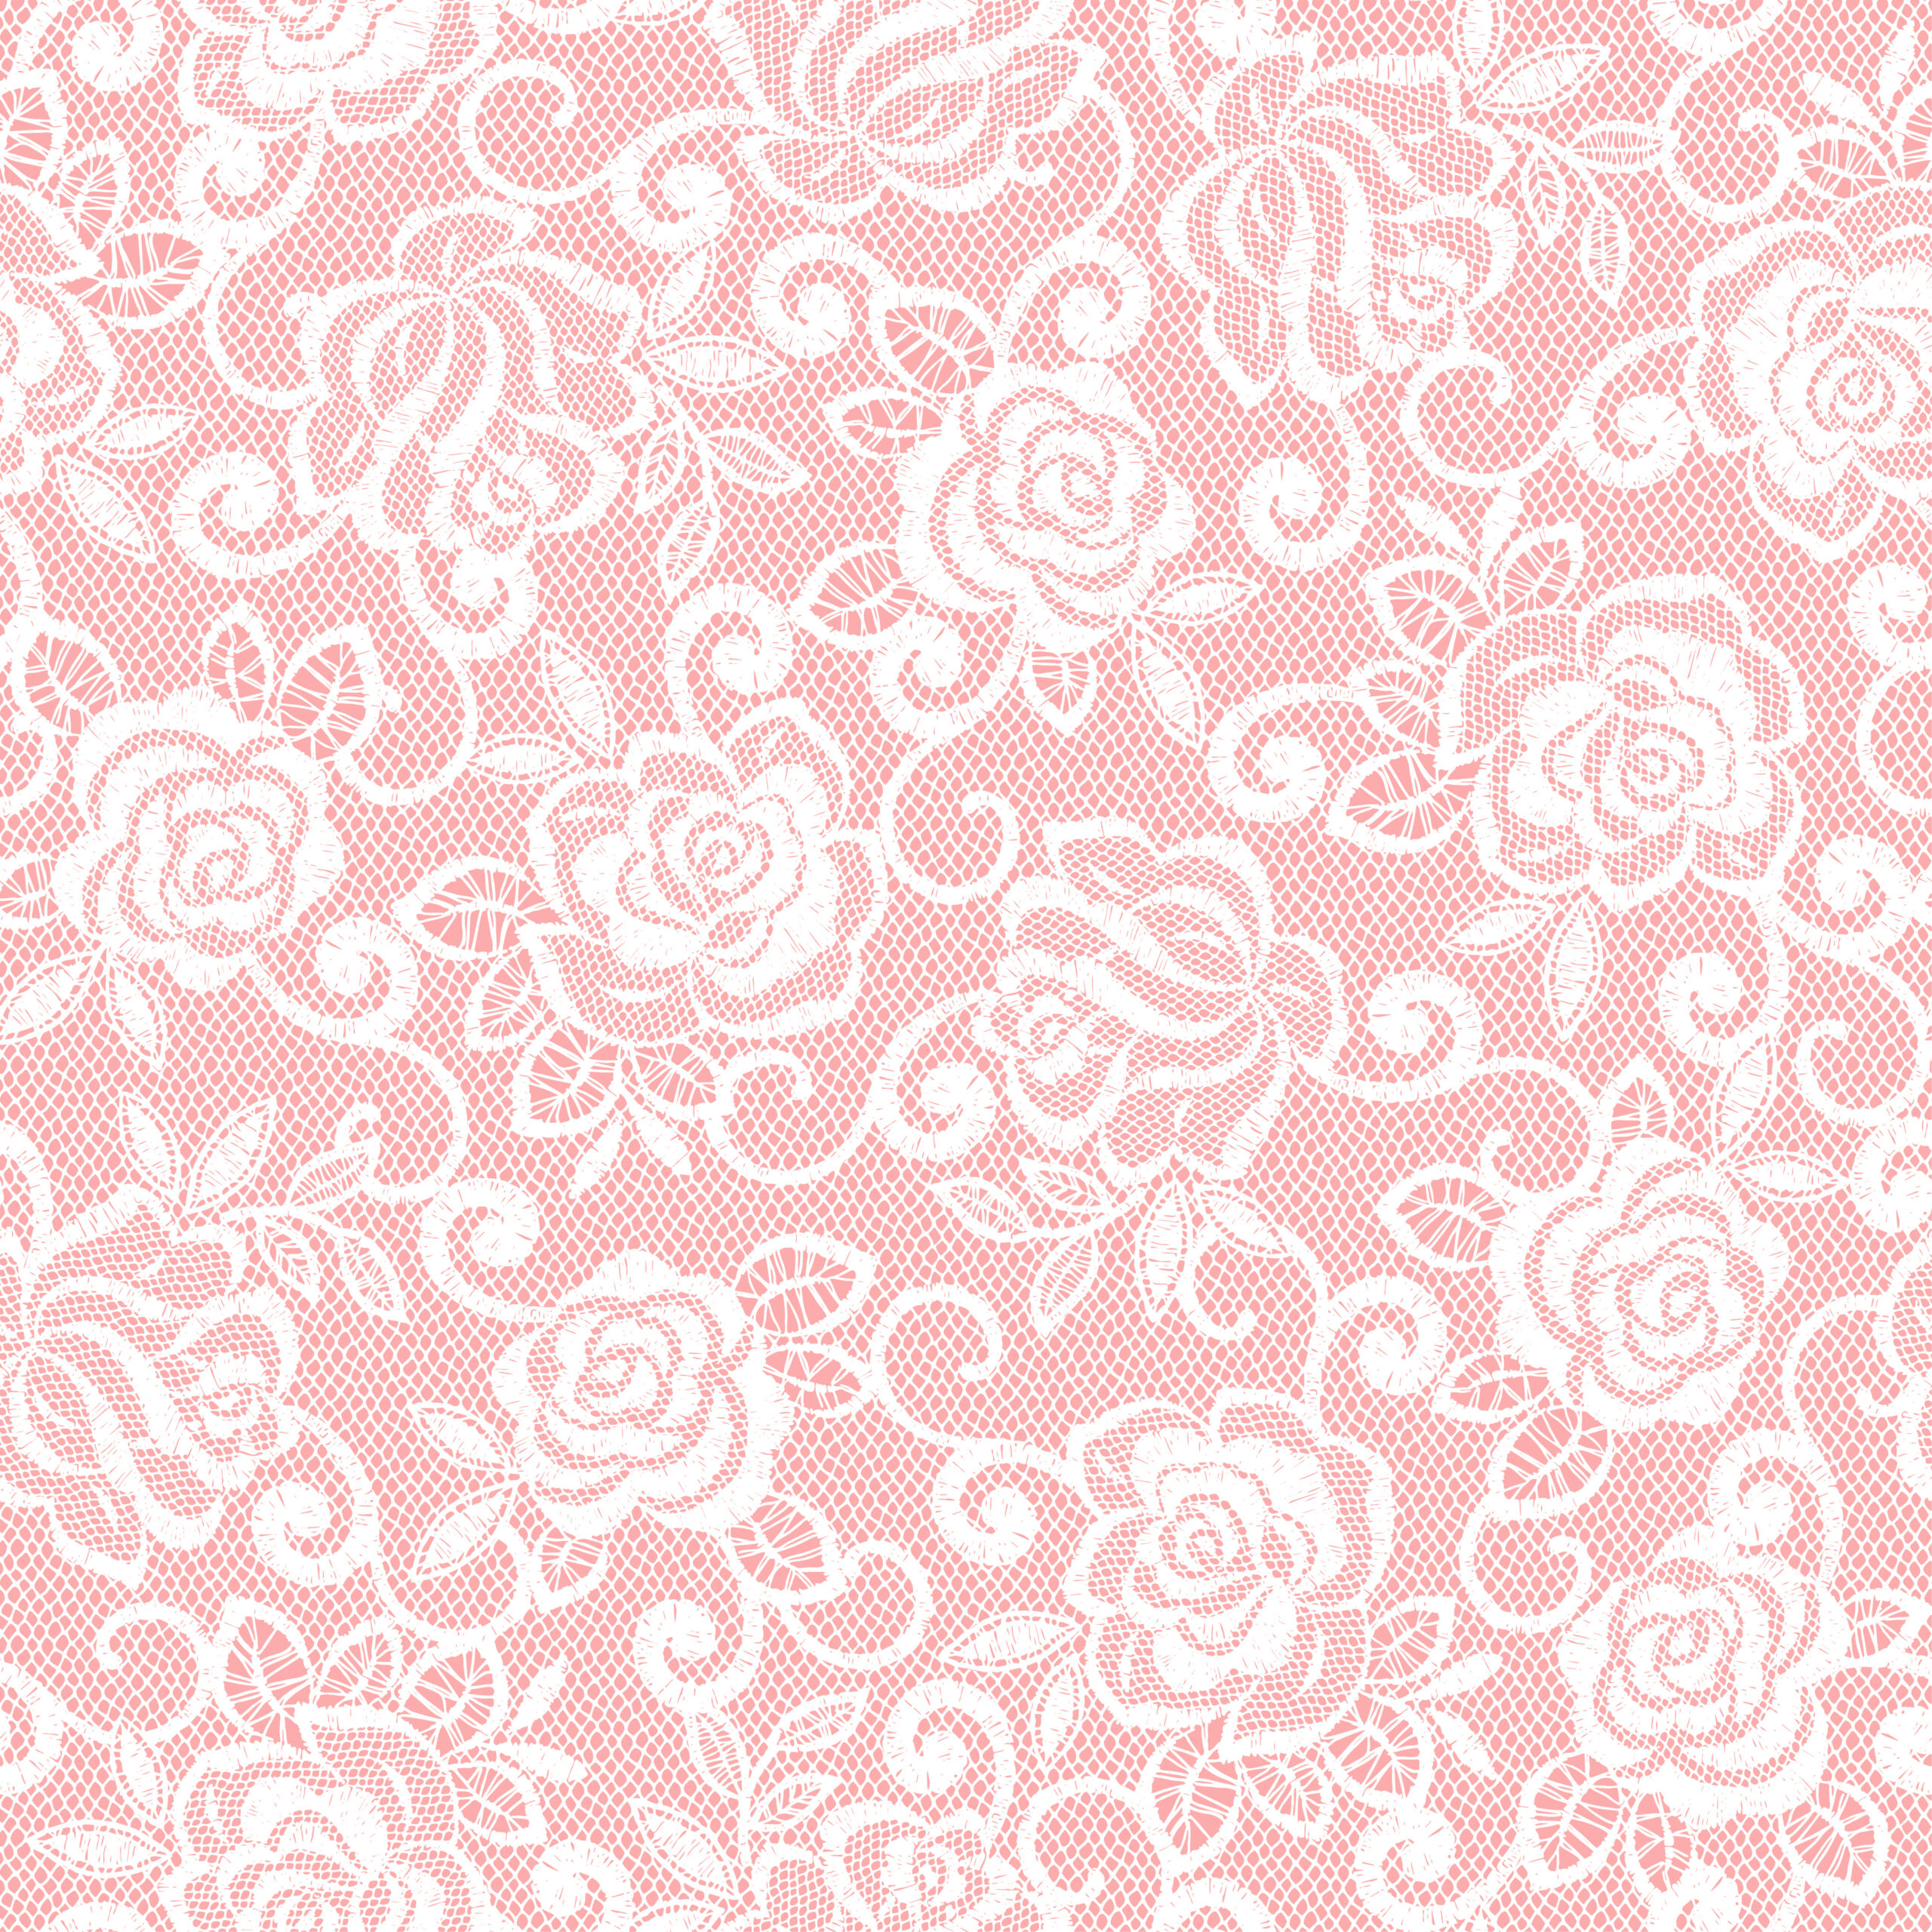 I made a seamless race pattern with the rose,